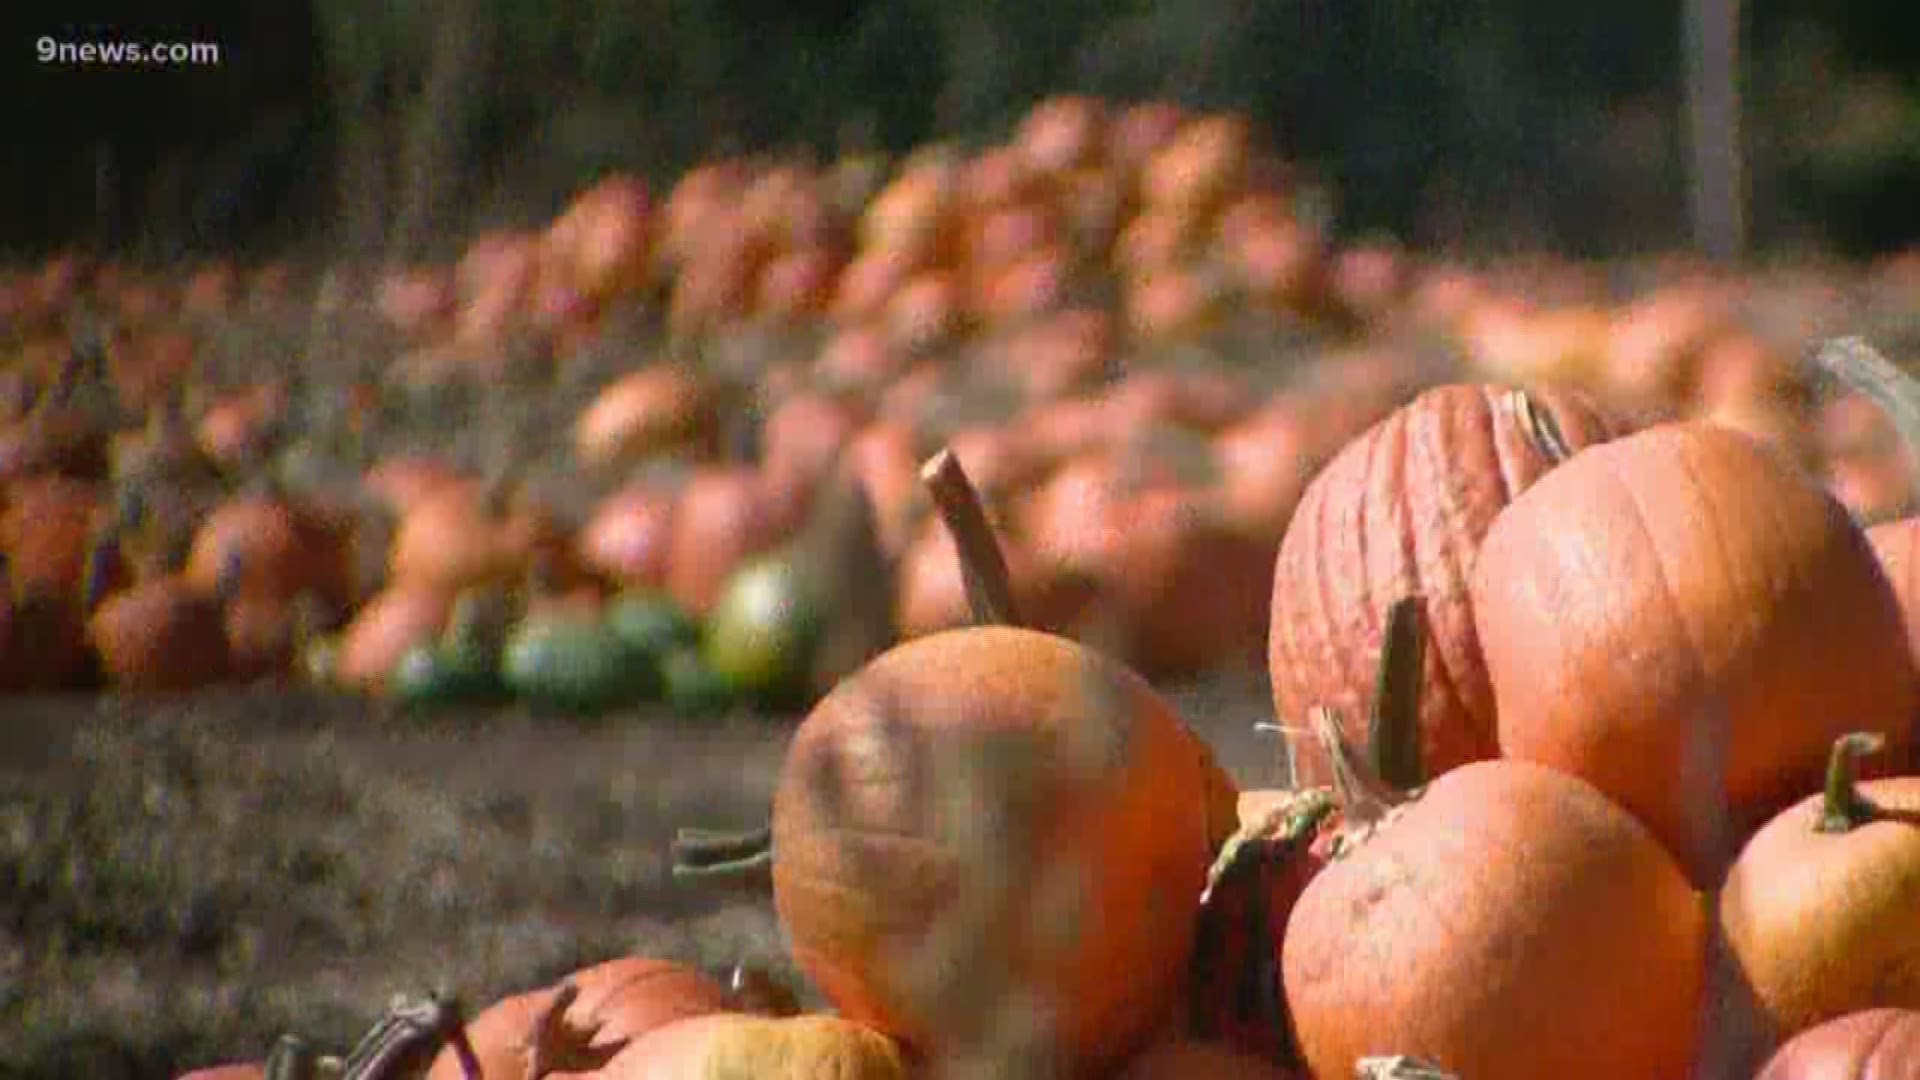 The pumpkin is one of the most nutrient dense plants on earth.